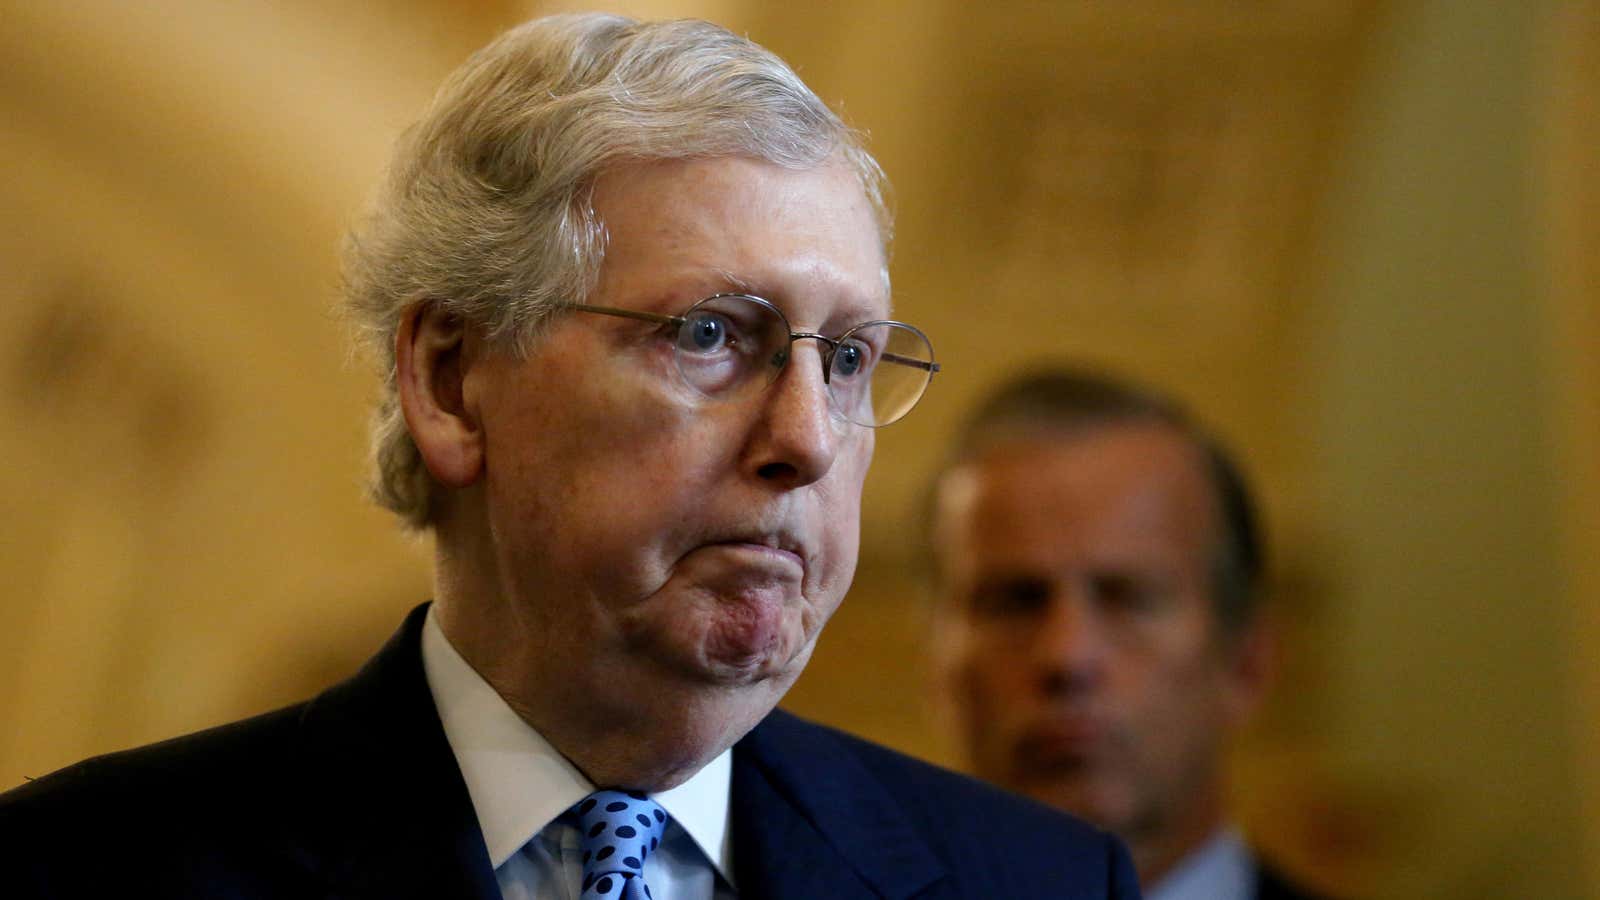 McConnell has ideas, just not about the law.